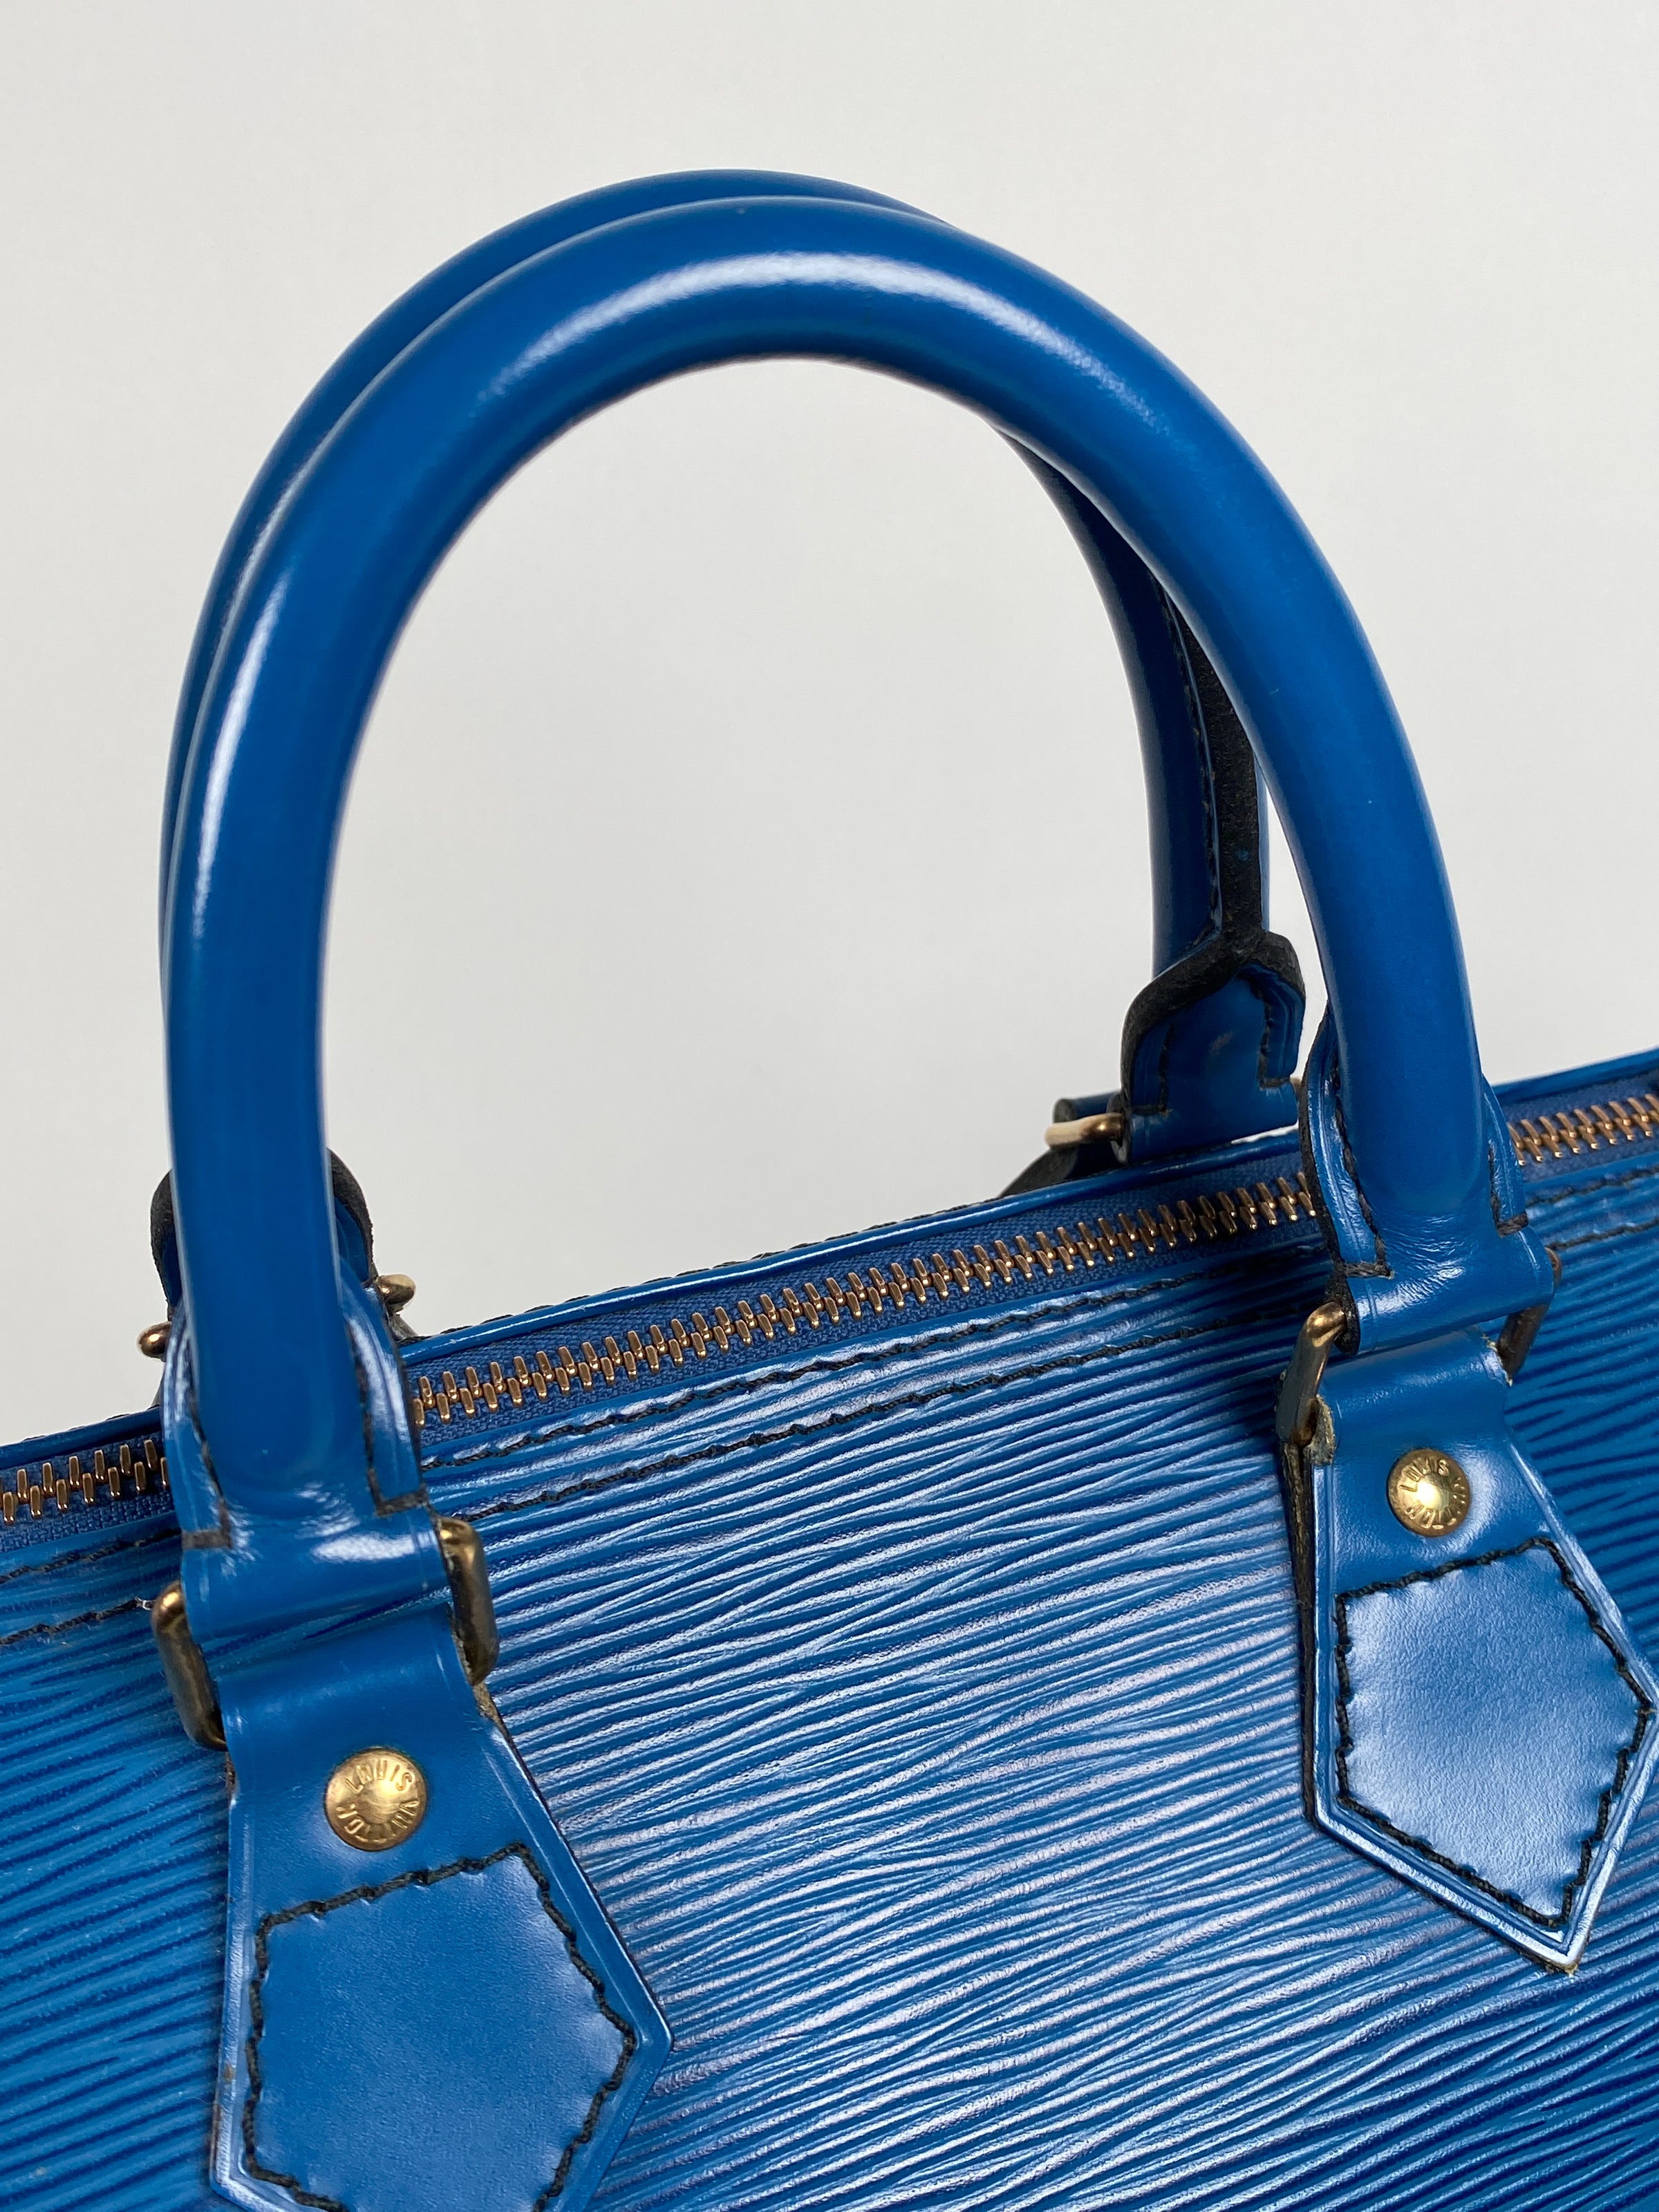 Louis Vuitton Epi Leather Speedy 30 Blue. Made in France. DC: VI0951